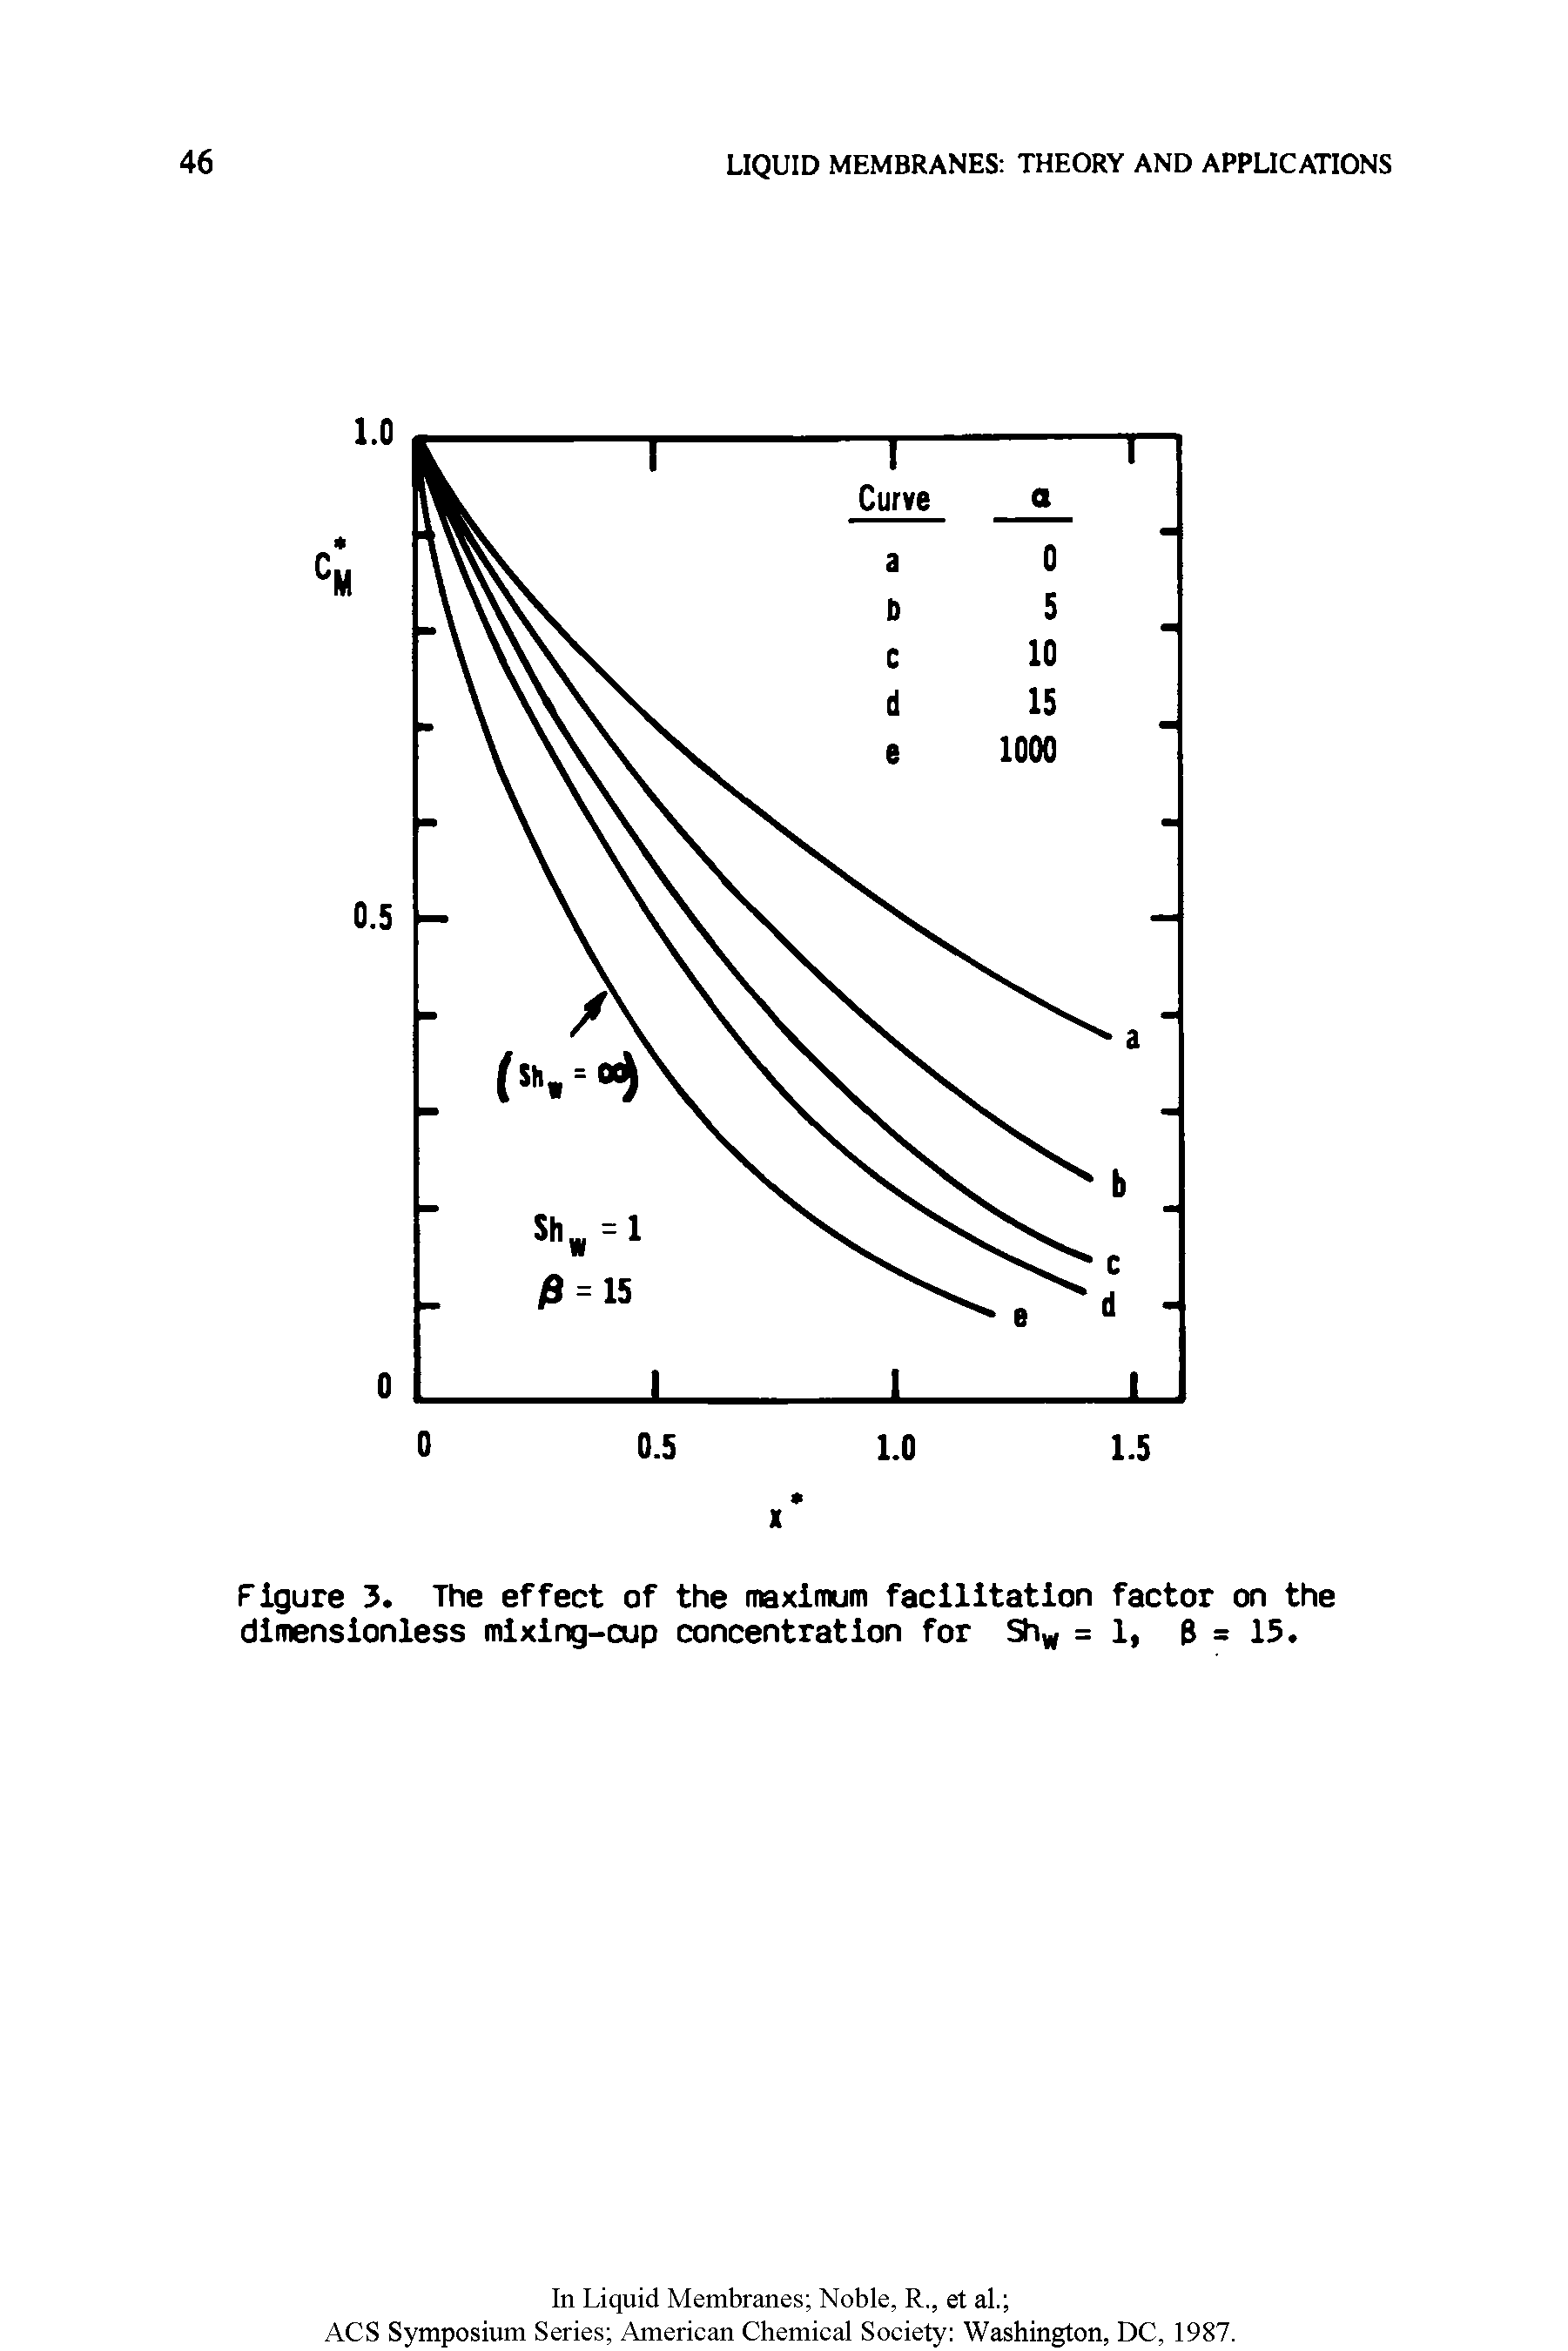 Figure 3. The effect of the maximum facilitation factor on the dimensionless mixing-cup concentration for Sh =1, 6 = 15.